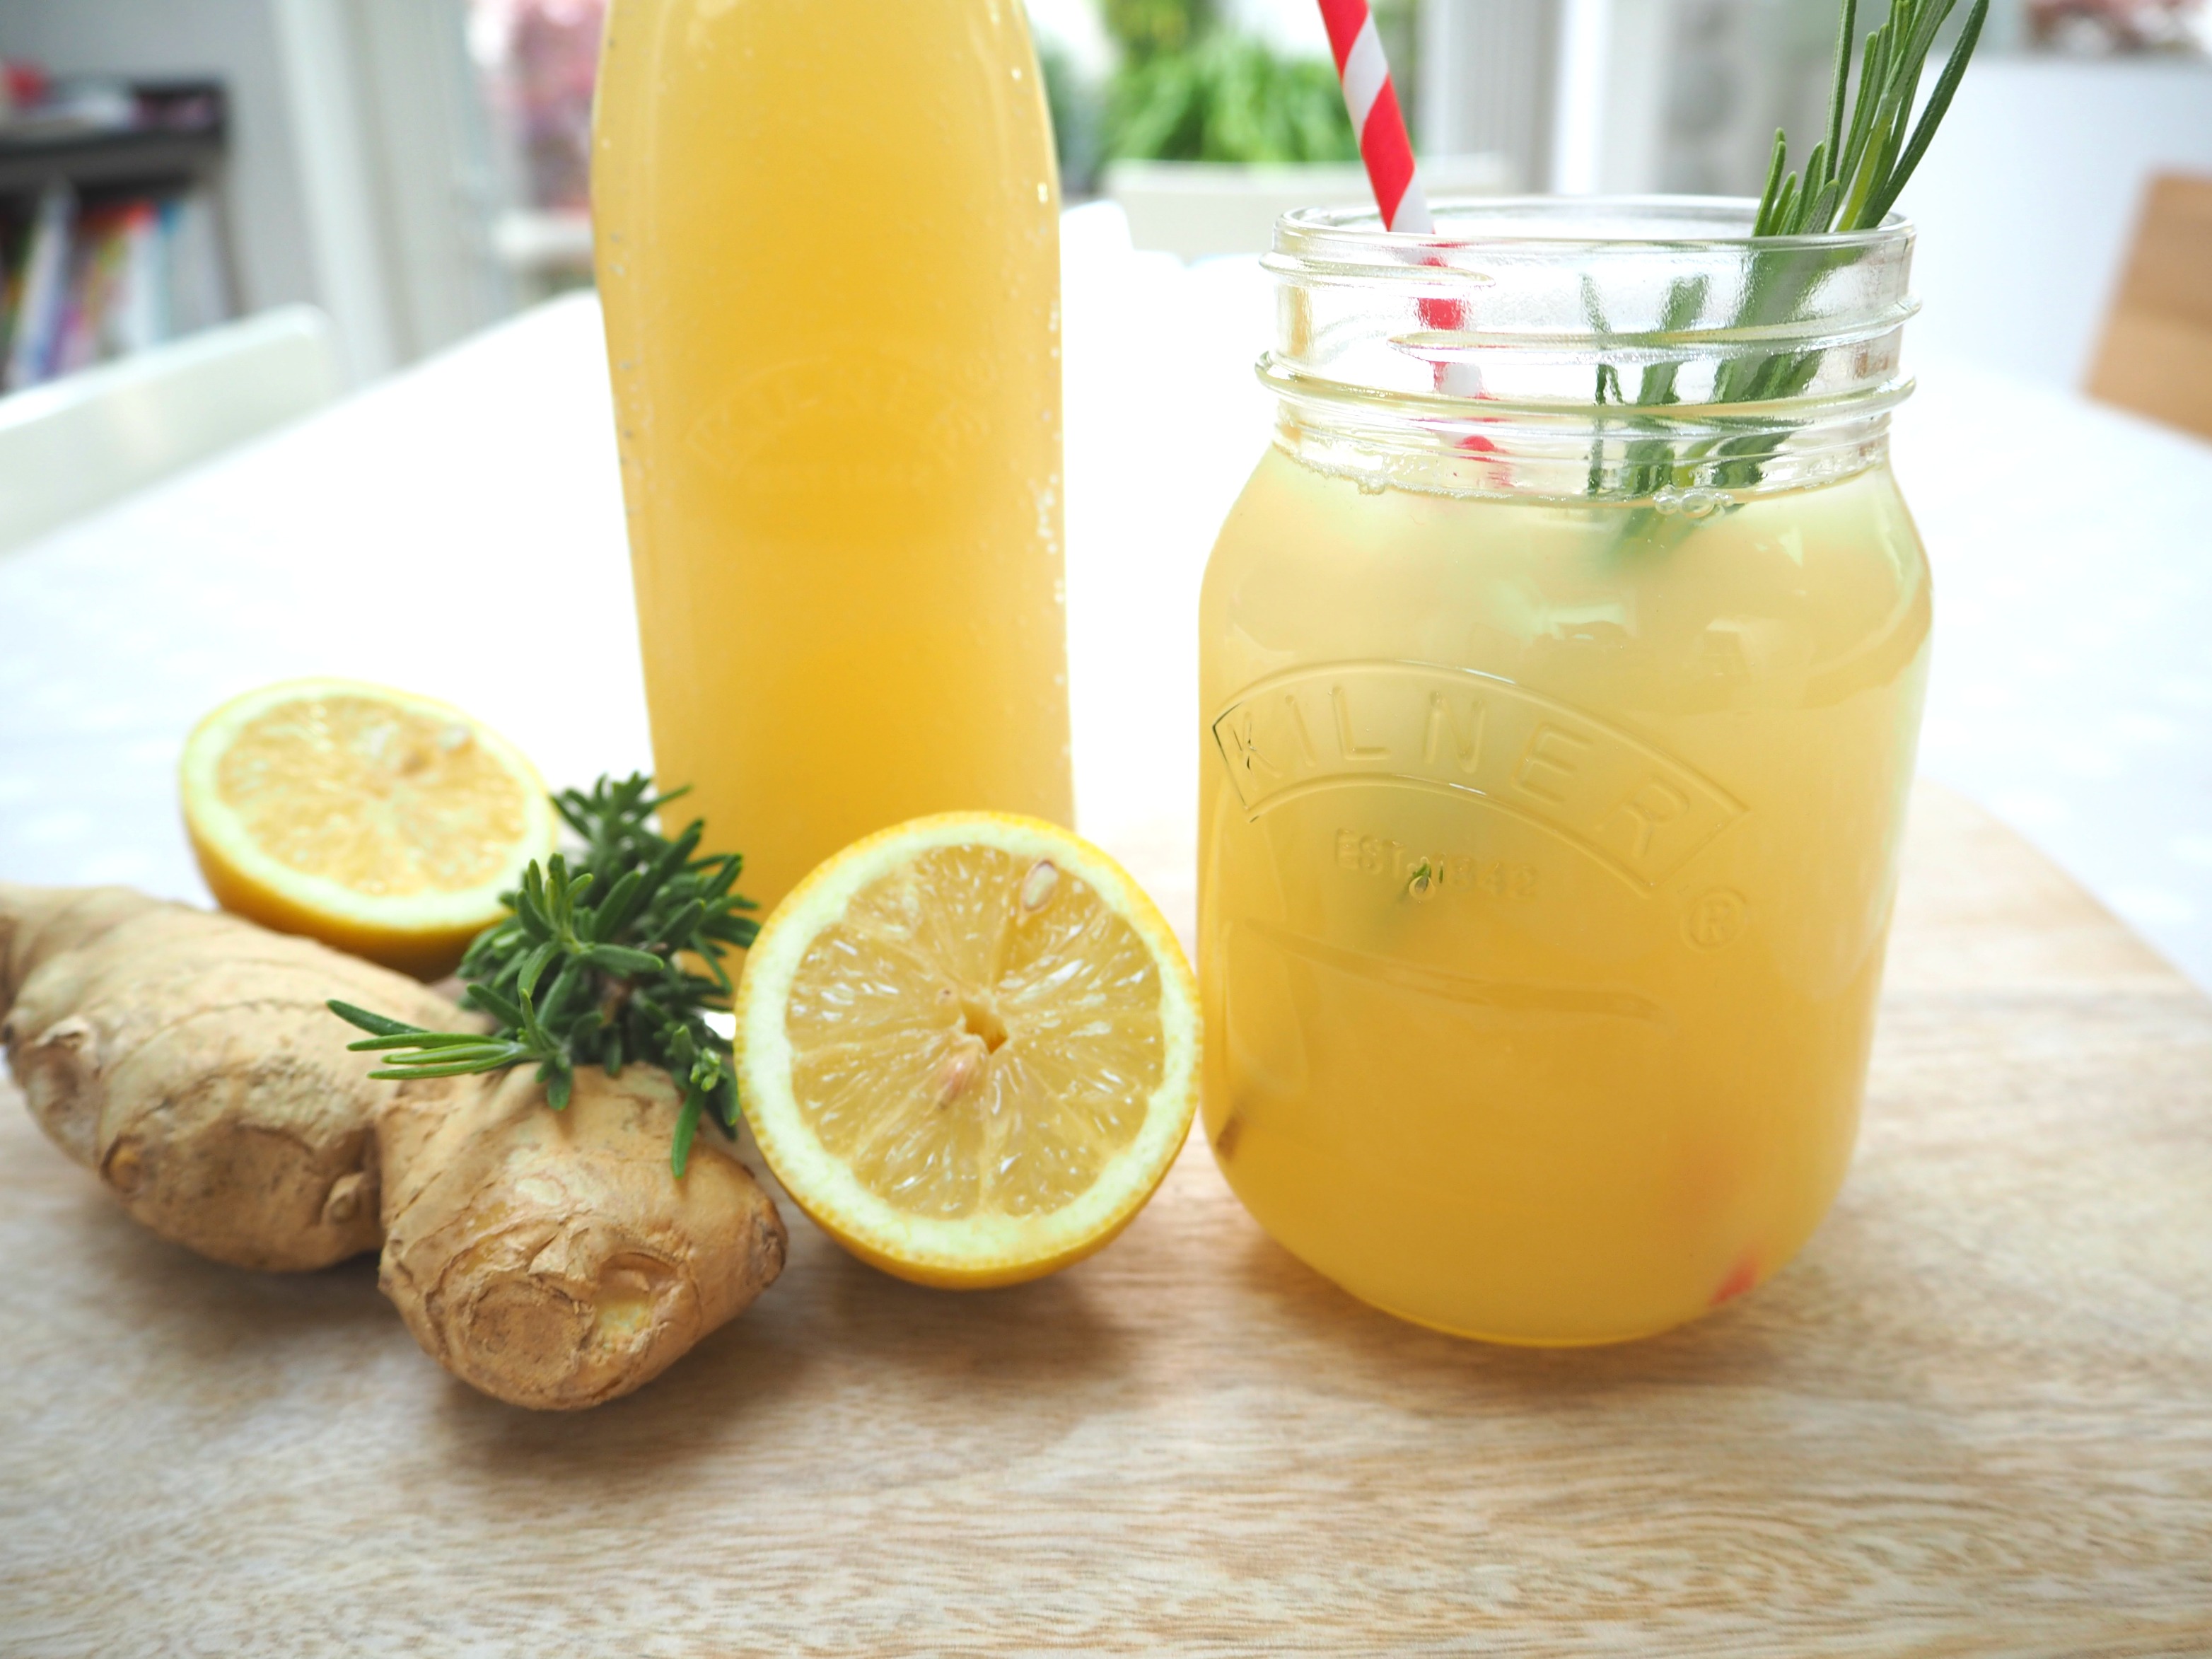 Lemon and ginger ale - Eat Drink Live Well